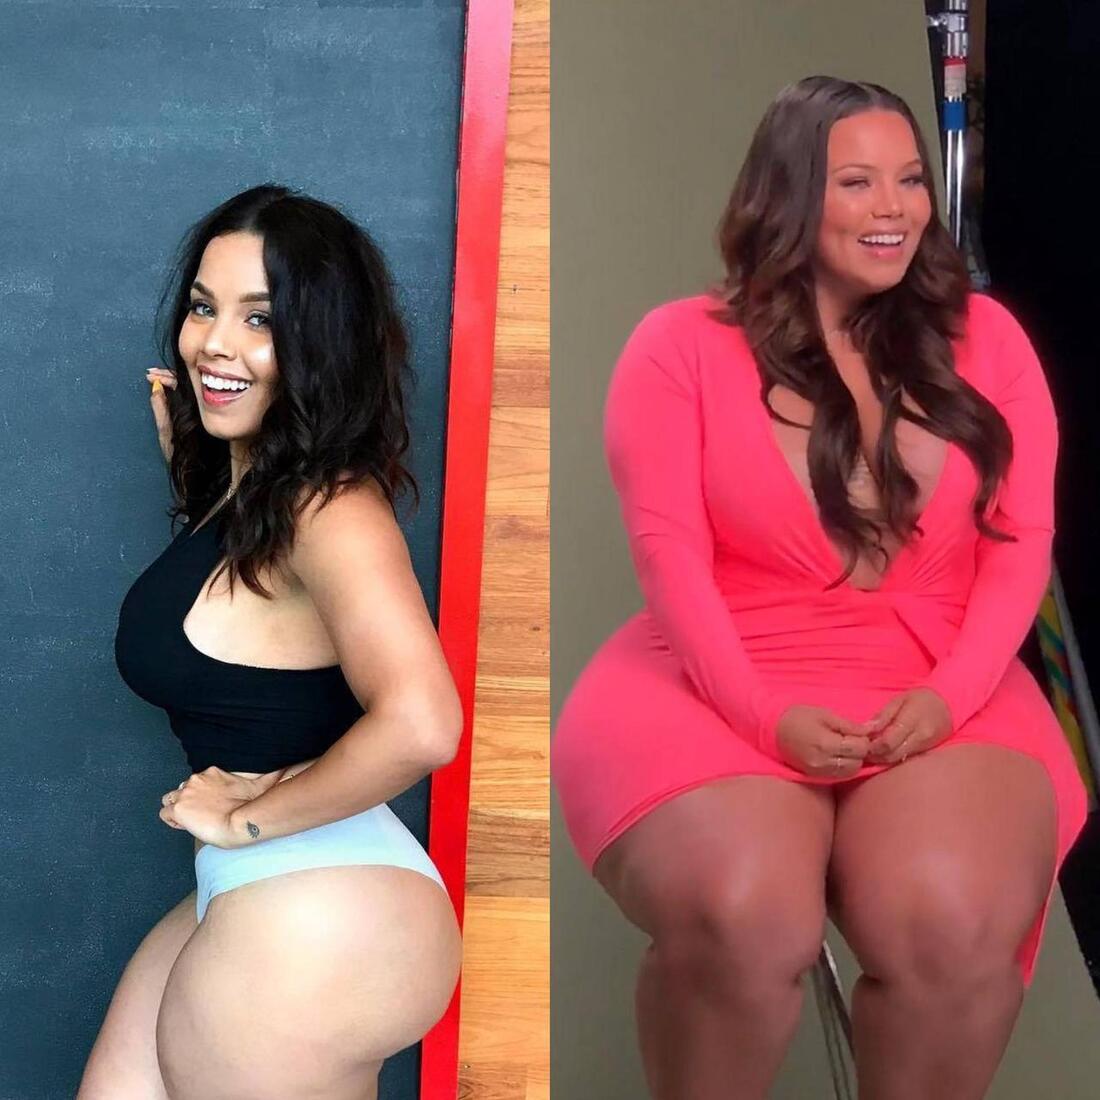 King steph weight gain